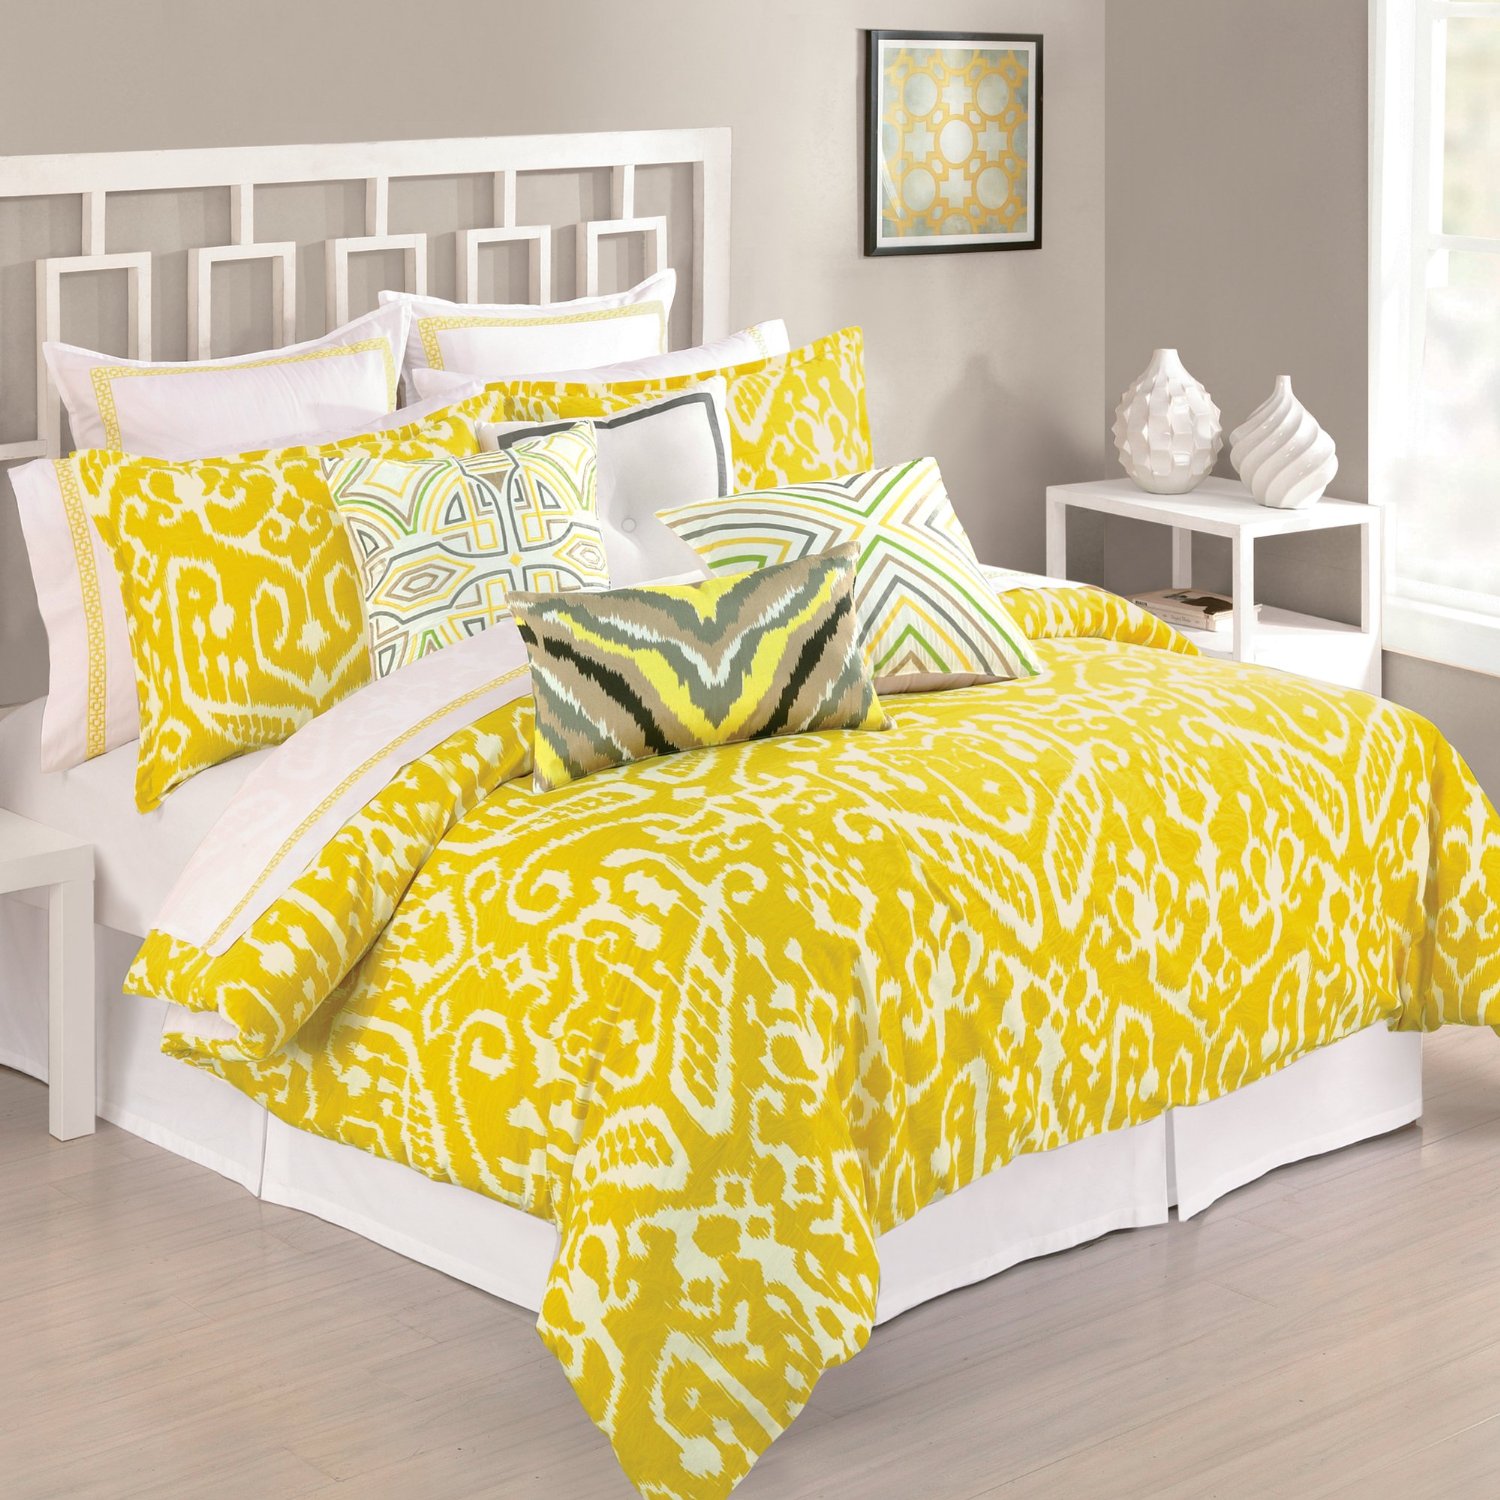 Mustard Yellow  Comforters and Bedding Sets